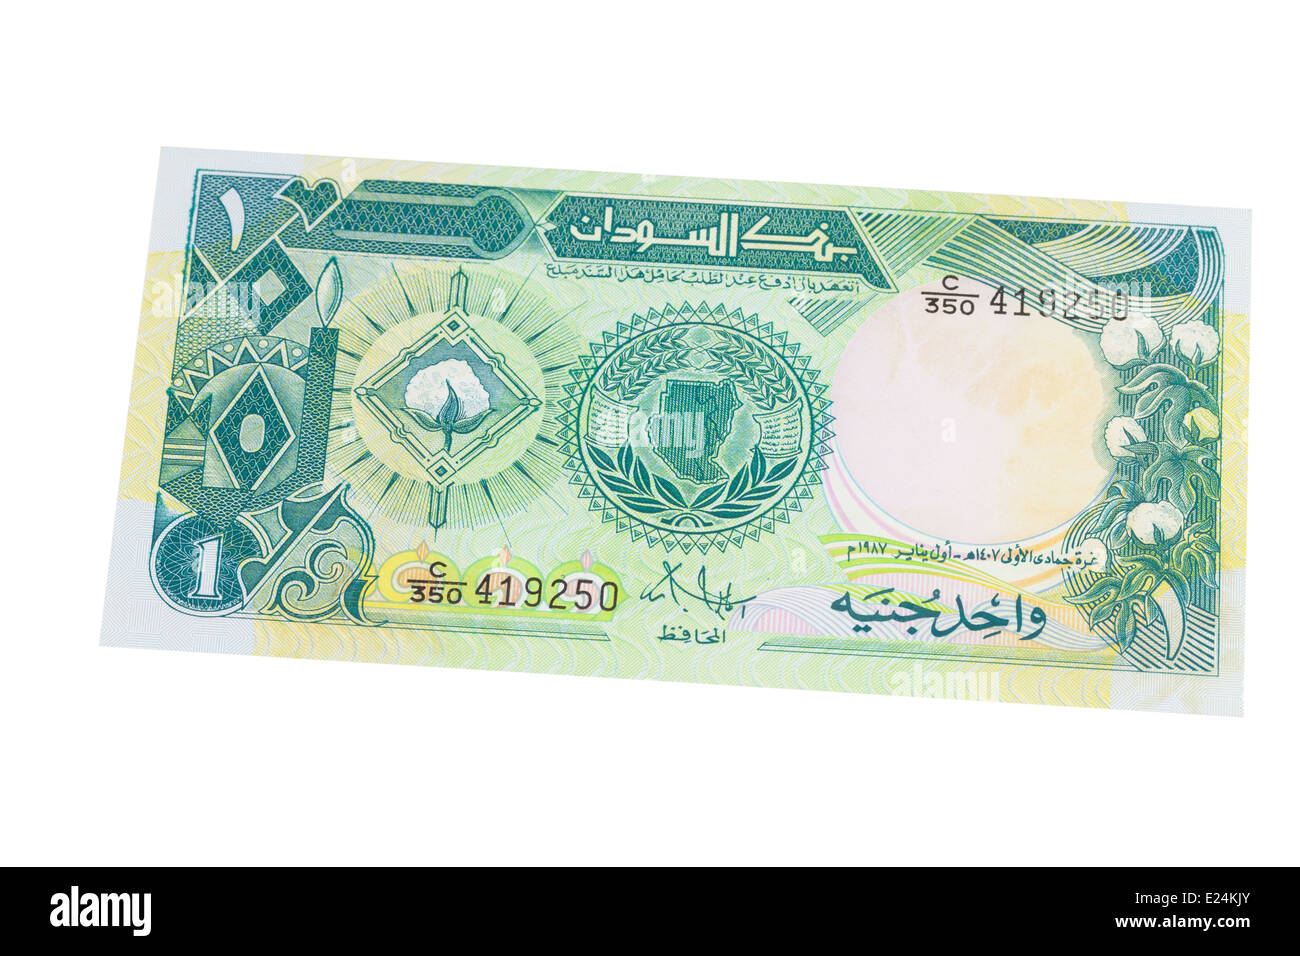 Sudanese one pound banknote on a white background Stock Photo